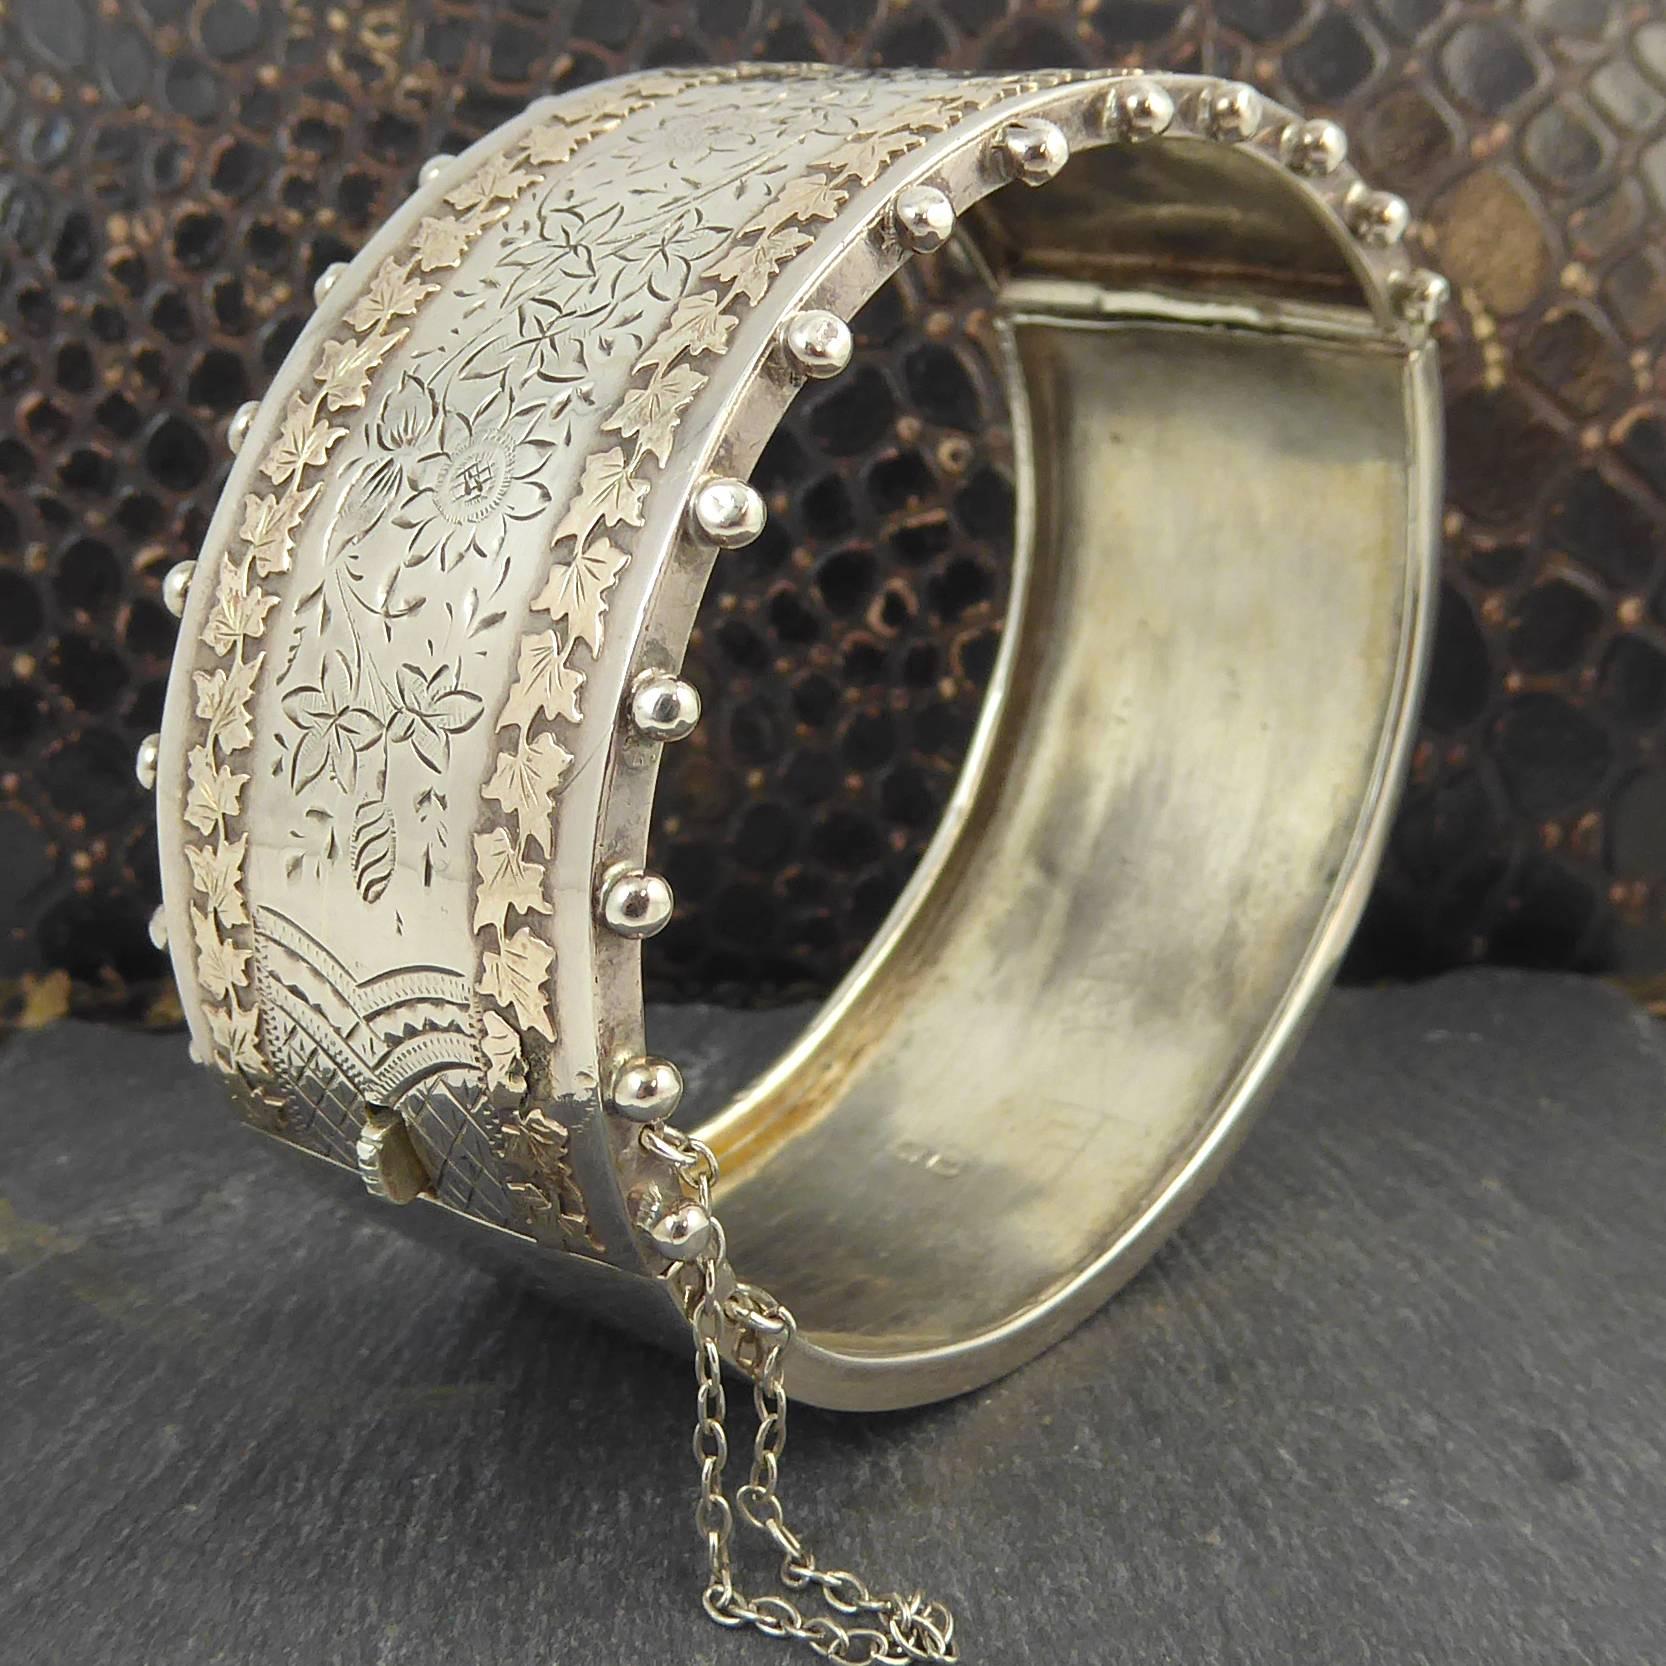 Women's Antique Victorian Silver and Gold Bangle, Floral Decoration, Hallmarked 1884